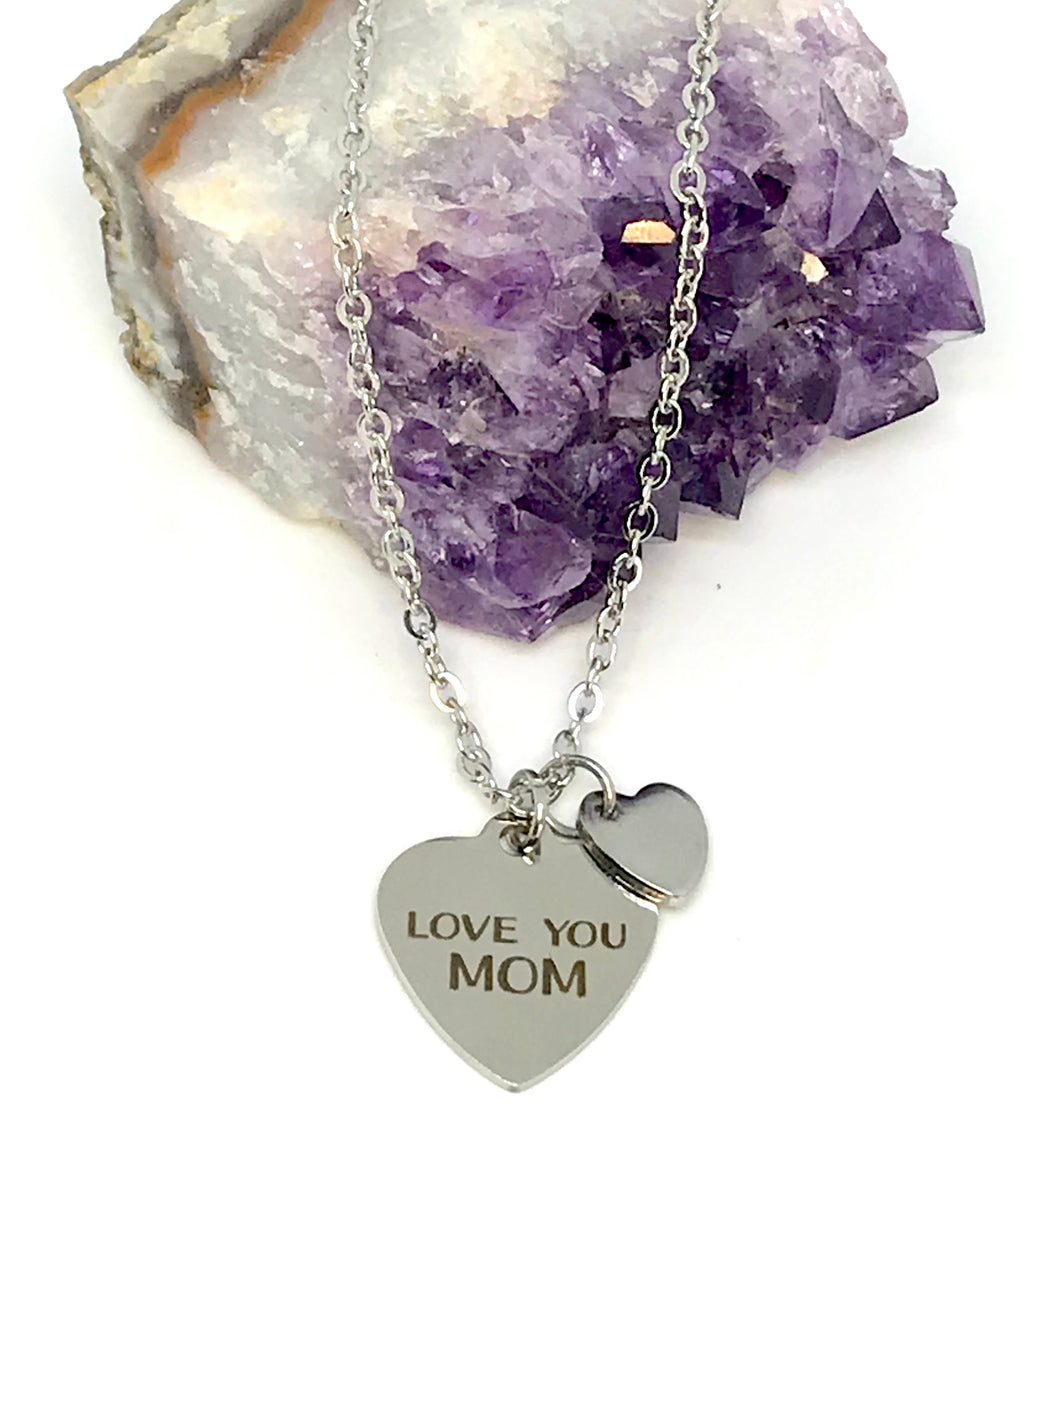 “Love You Mom” 3-in-1 Charm Necklace (Stainless Steel)